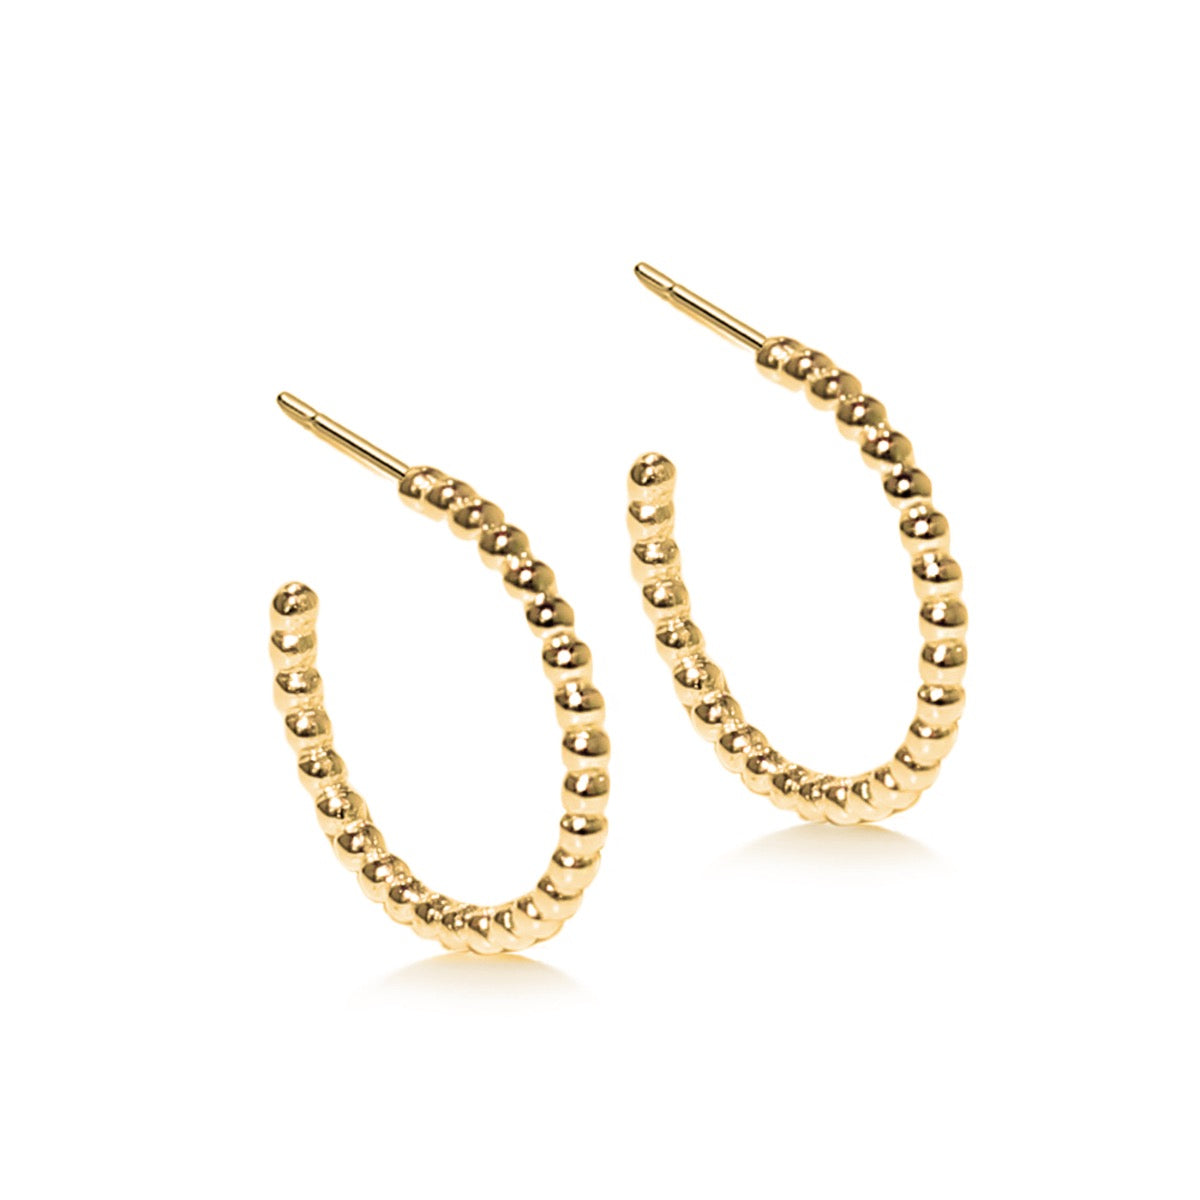 Gold plated and silver hoop earrings